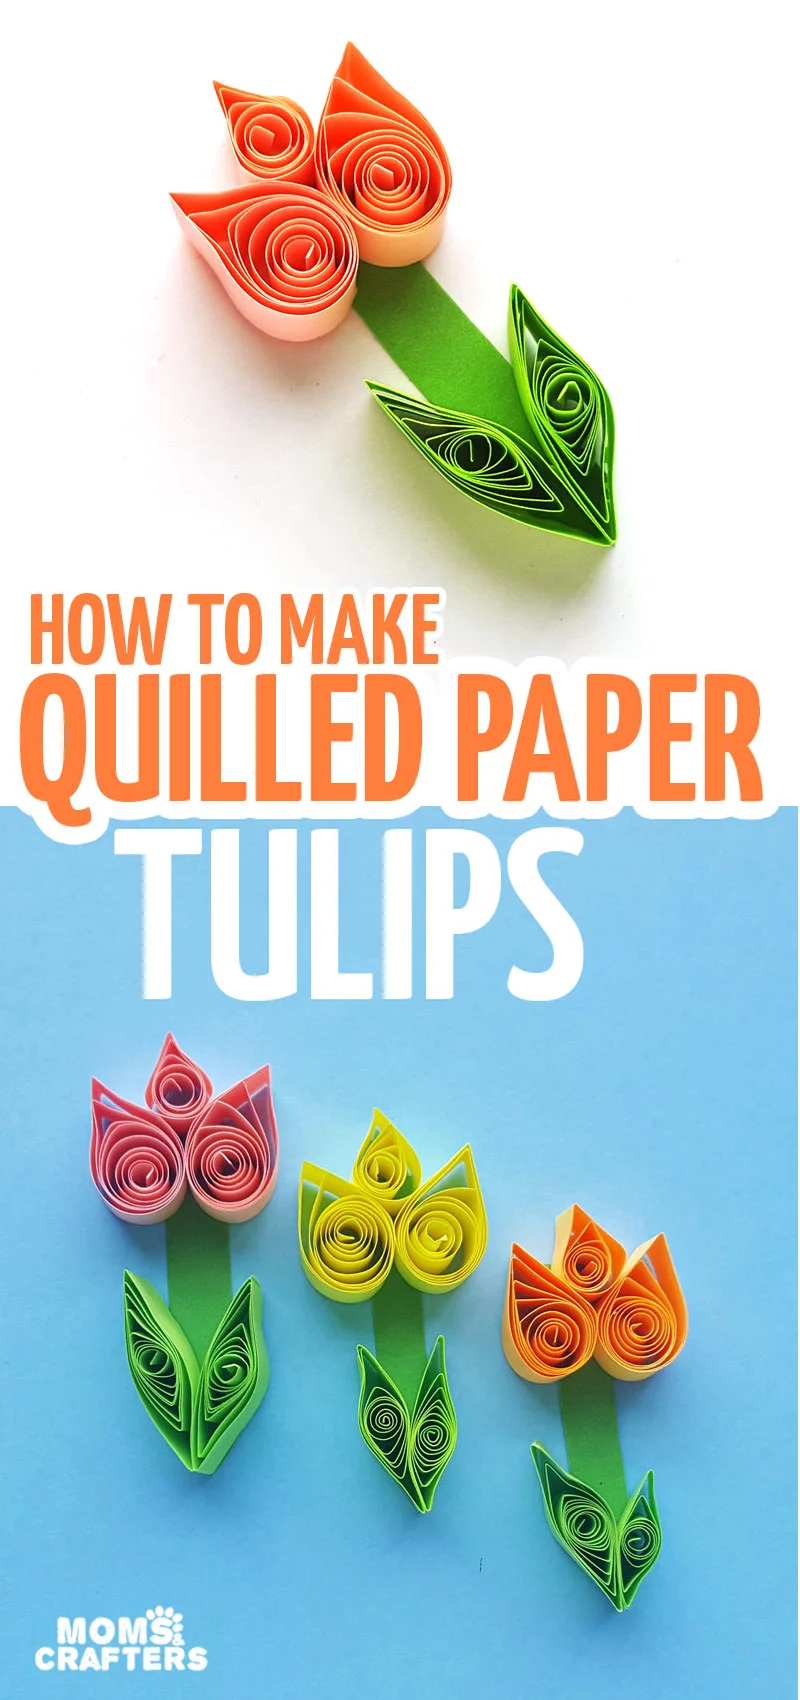 Click to learn how to make paper quilling tulips - a fun paper craft for Spring for kids, teens, and tweens. It's also a great quilled paper tutorial for beginners and a great Mother's Day card idea!